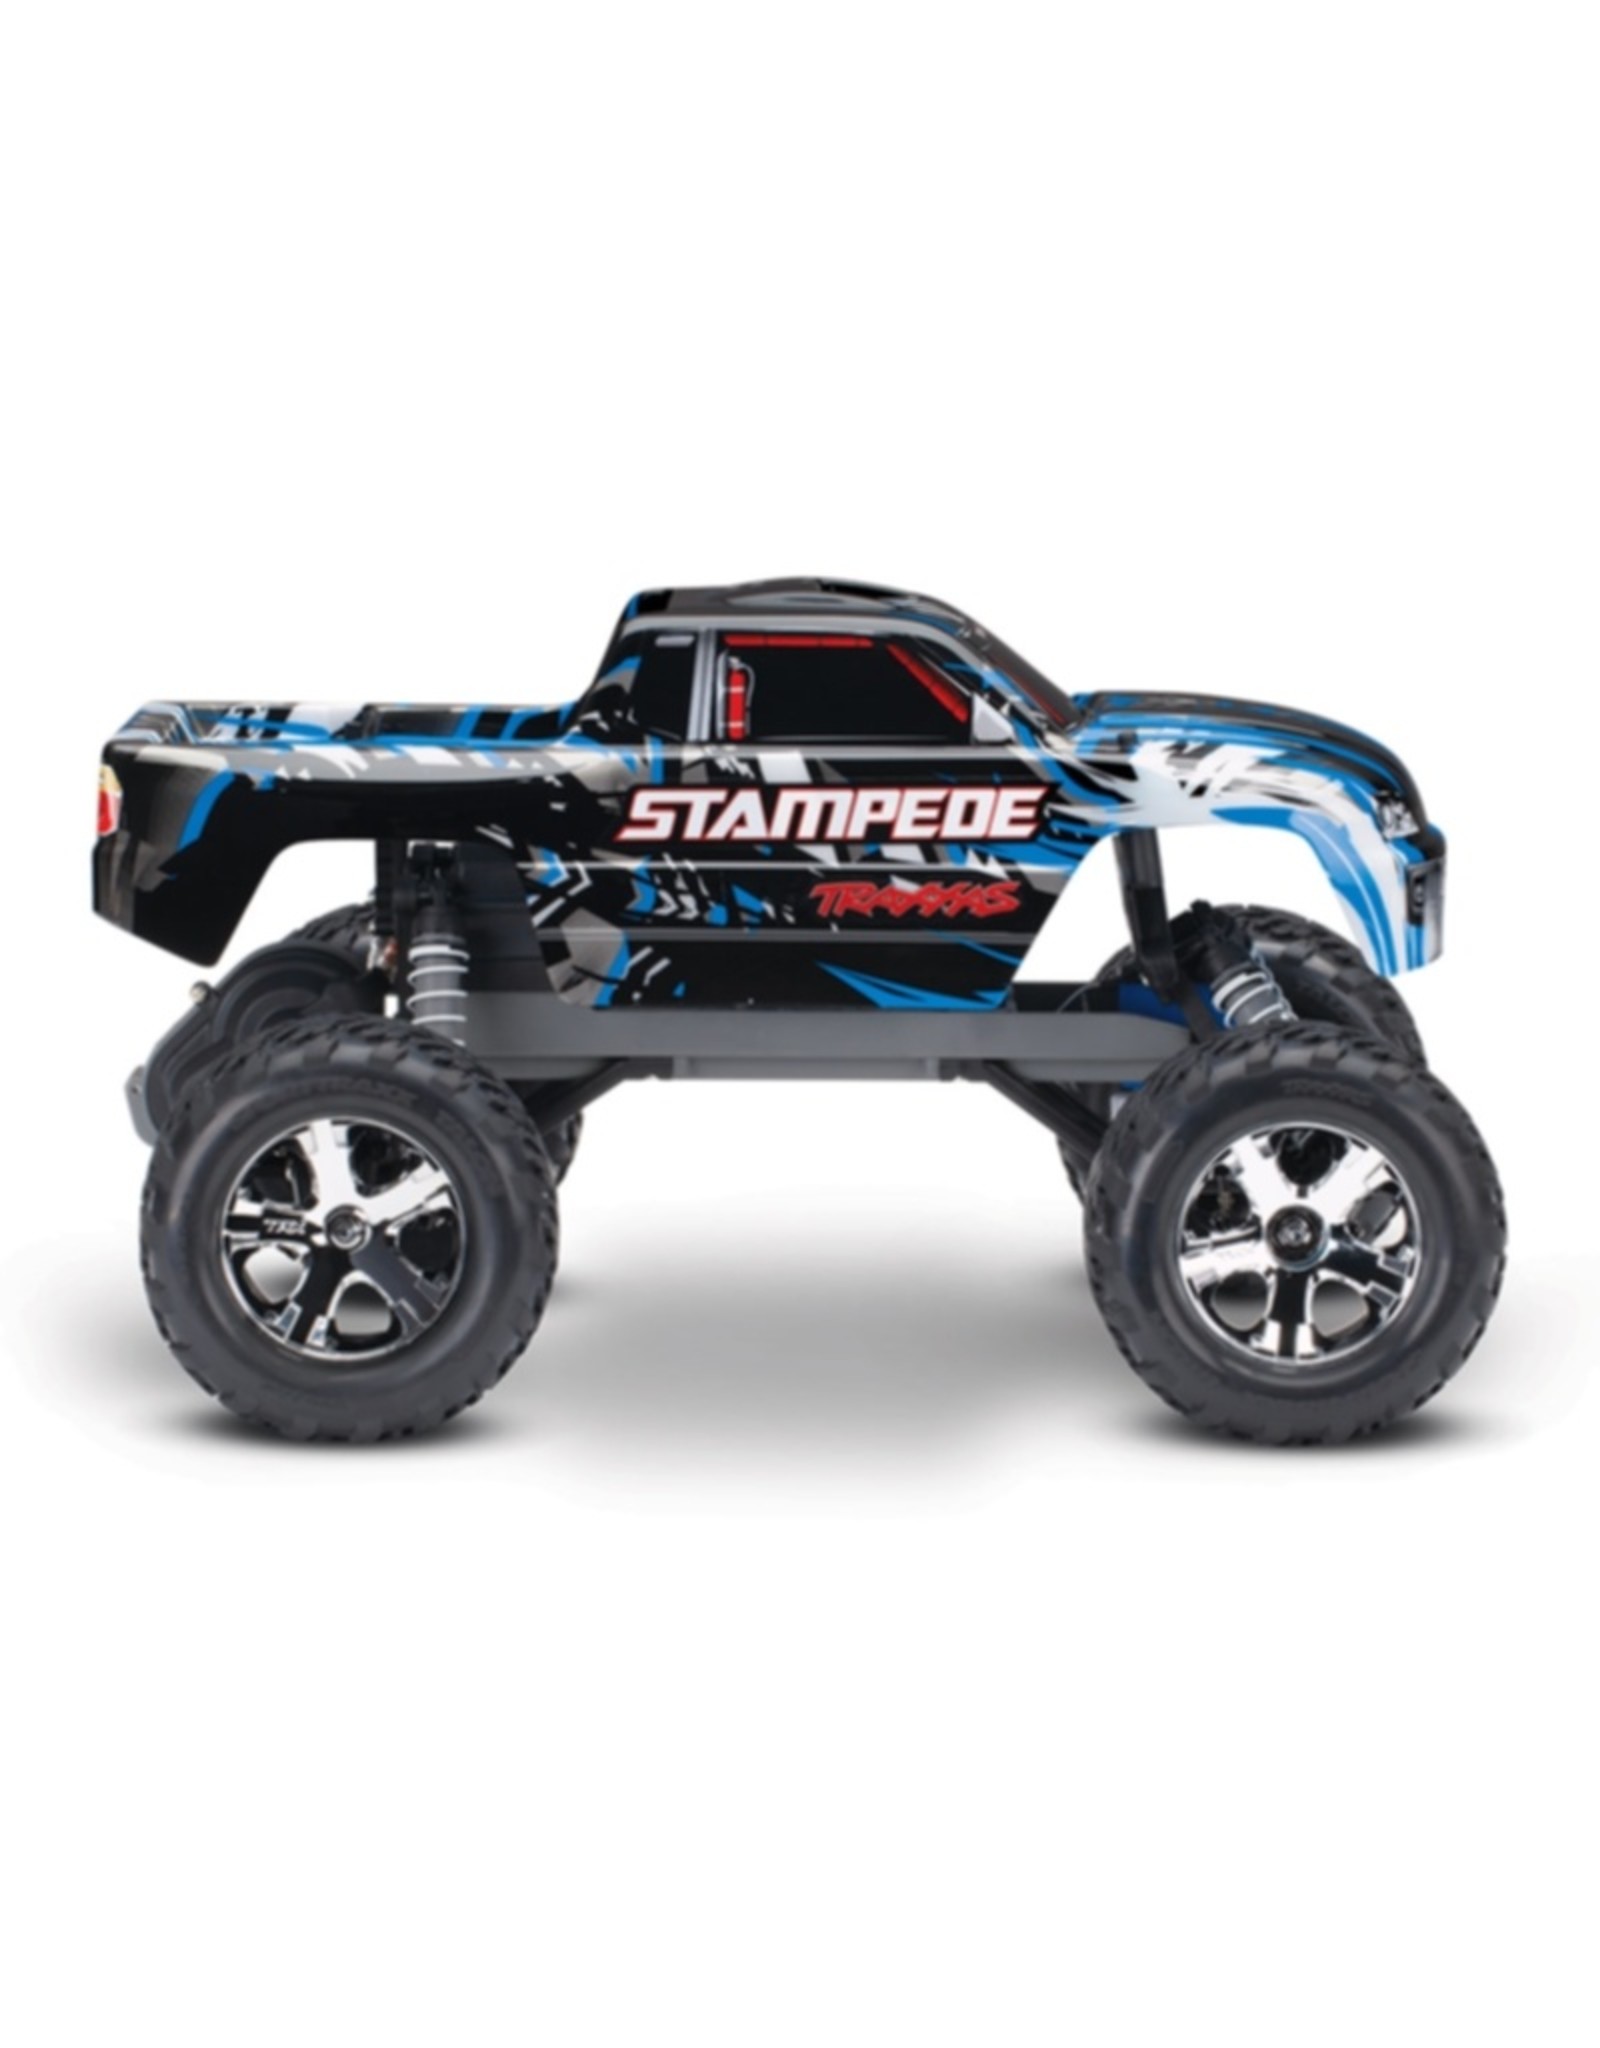 Traxxas TRA36054-1 BLUEX Stampede : 1/10 Scale Monster Truck with TQ 2.4GHz radio system